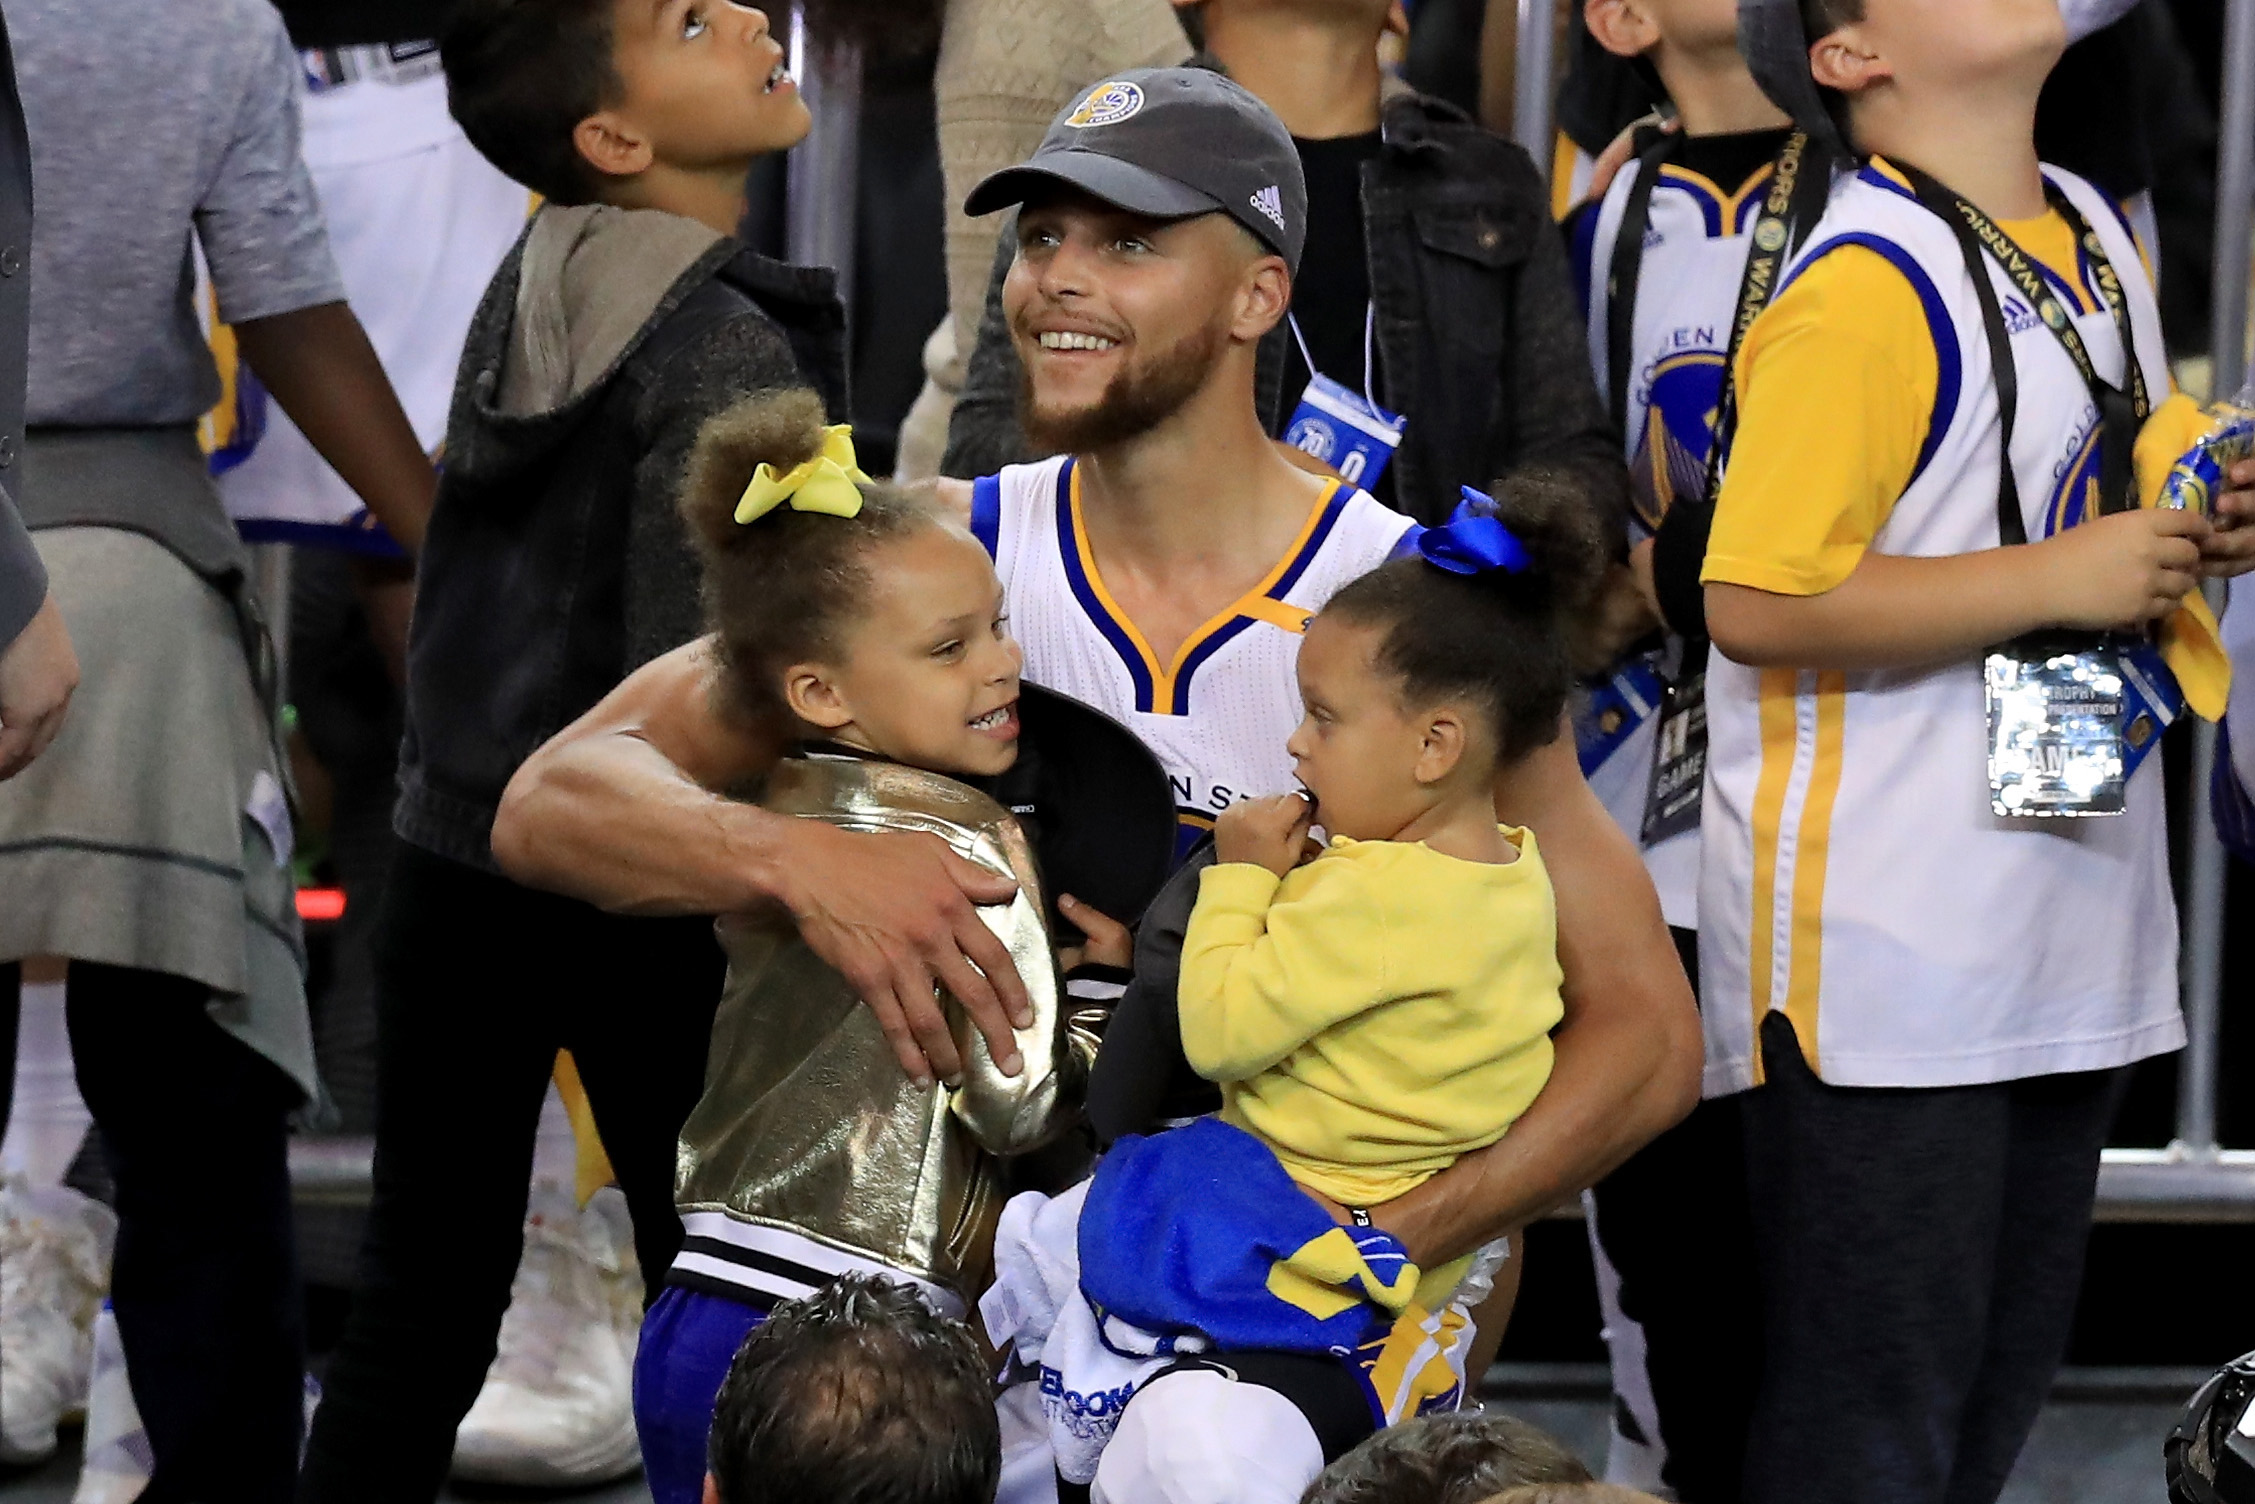 PHOTO: Stephen Curry of the Golden State Warriors celebrates holding his daughters Riley and Ryan after defeating the Cleveland Cavaliers 129-120 in Game 5 to win the 2017 NBA Finals at ORACLE Arena, June 12, 2017, in Oakland, Calif.